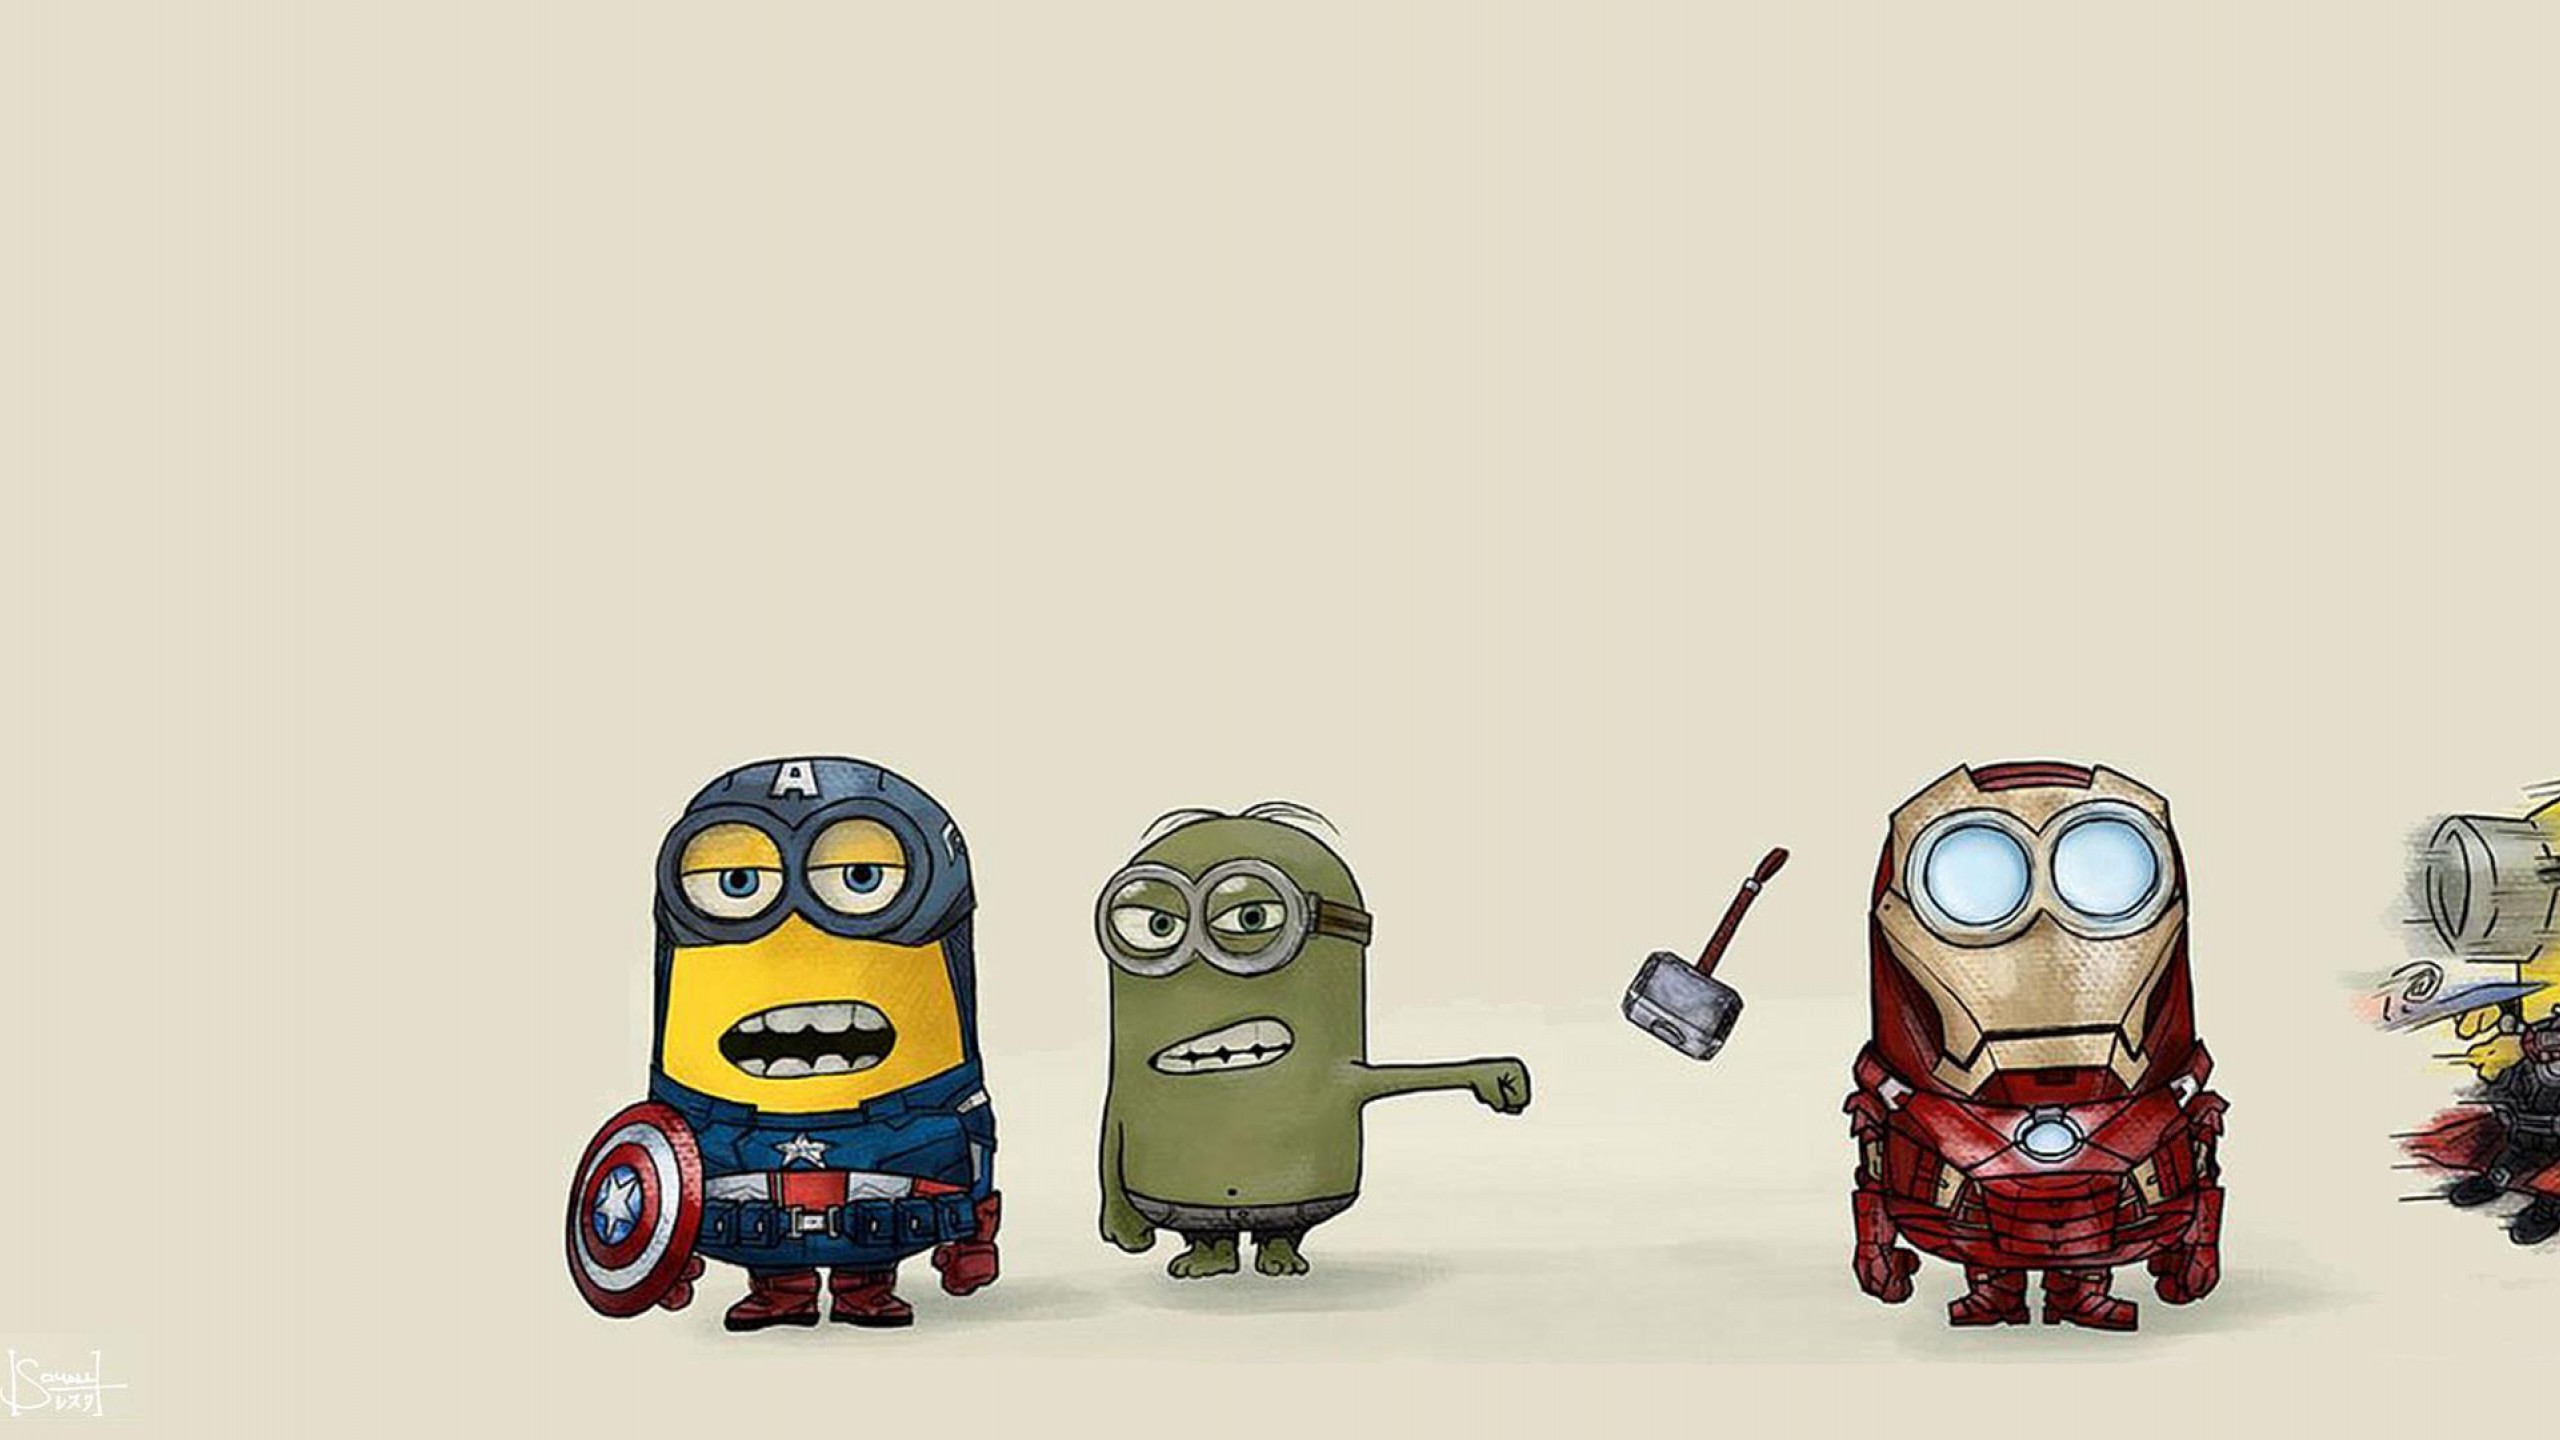 Minions Avengers HD Wallpaper available in different dimensions Youtube Cover Photo